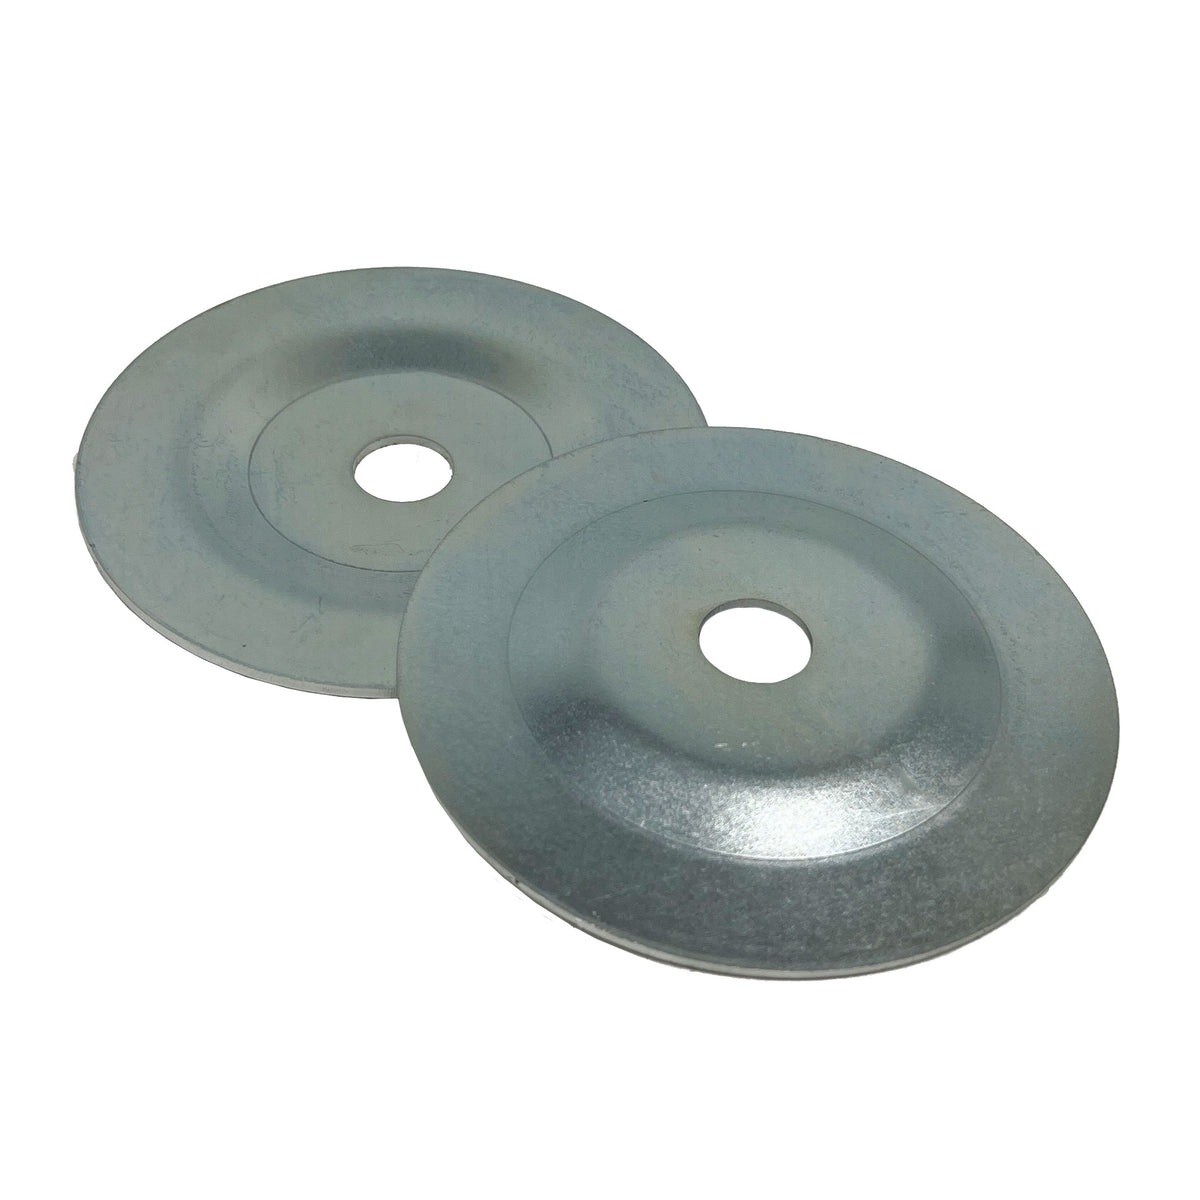 Safety Flanges for High Speed Polishing (For Buffing Wheels With Center Plates)